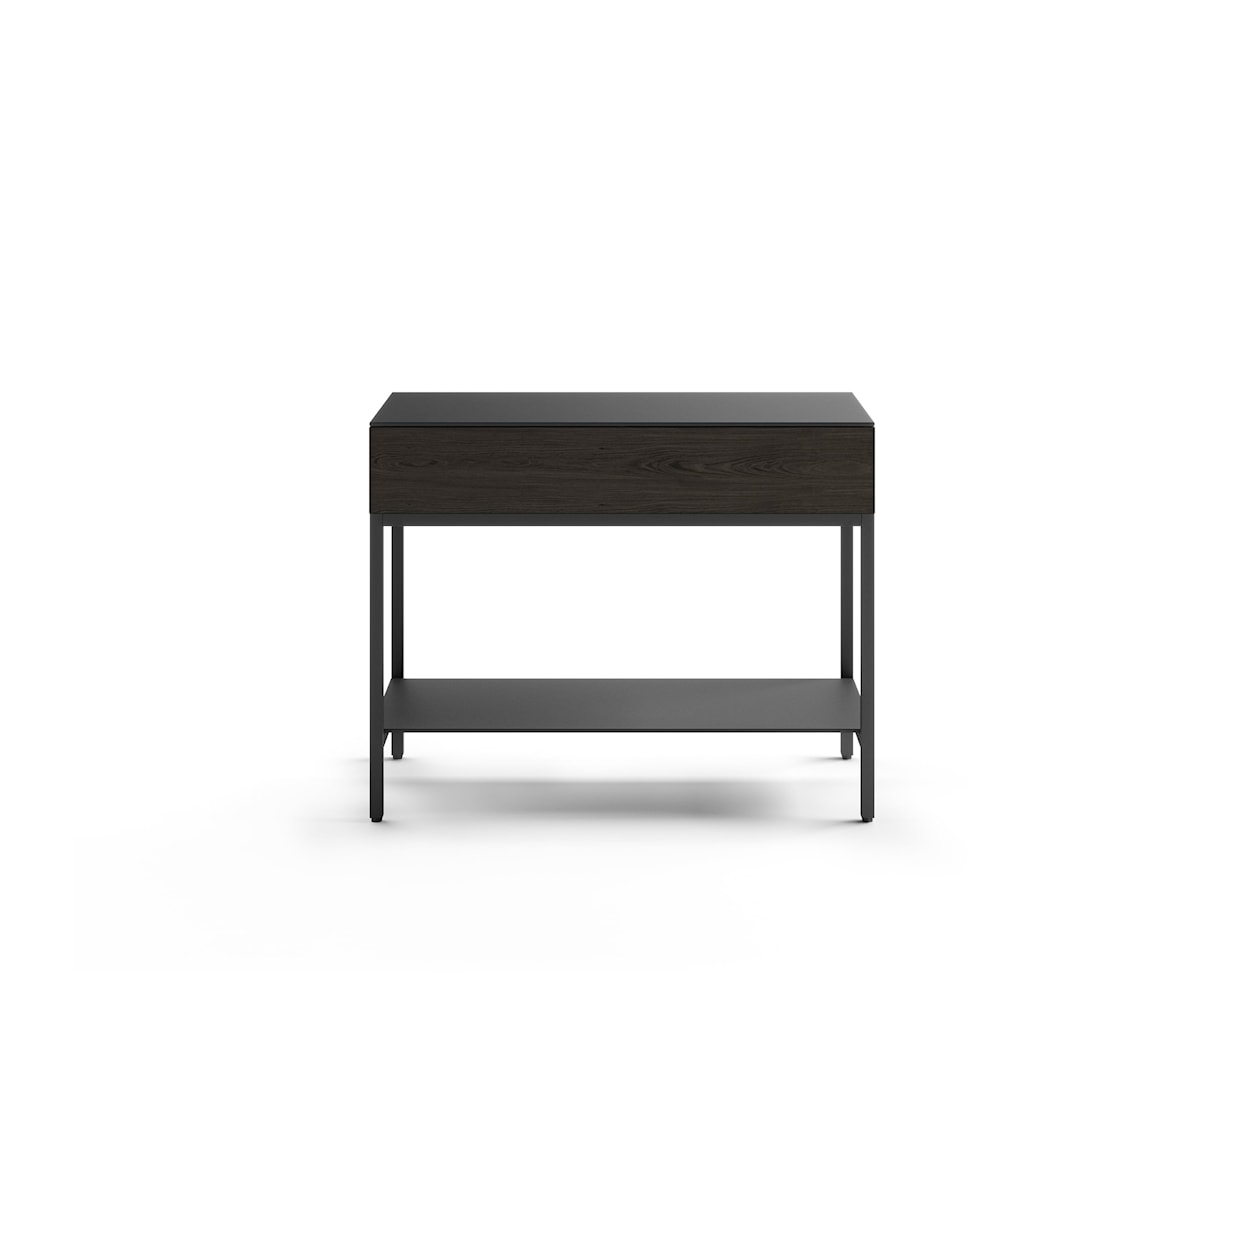 BDI Reveal End Table